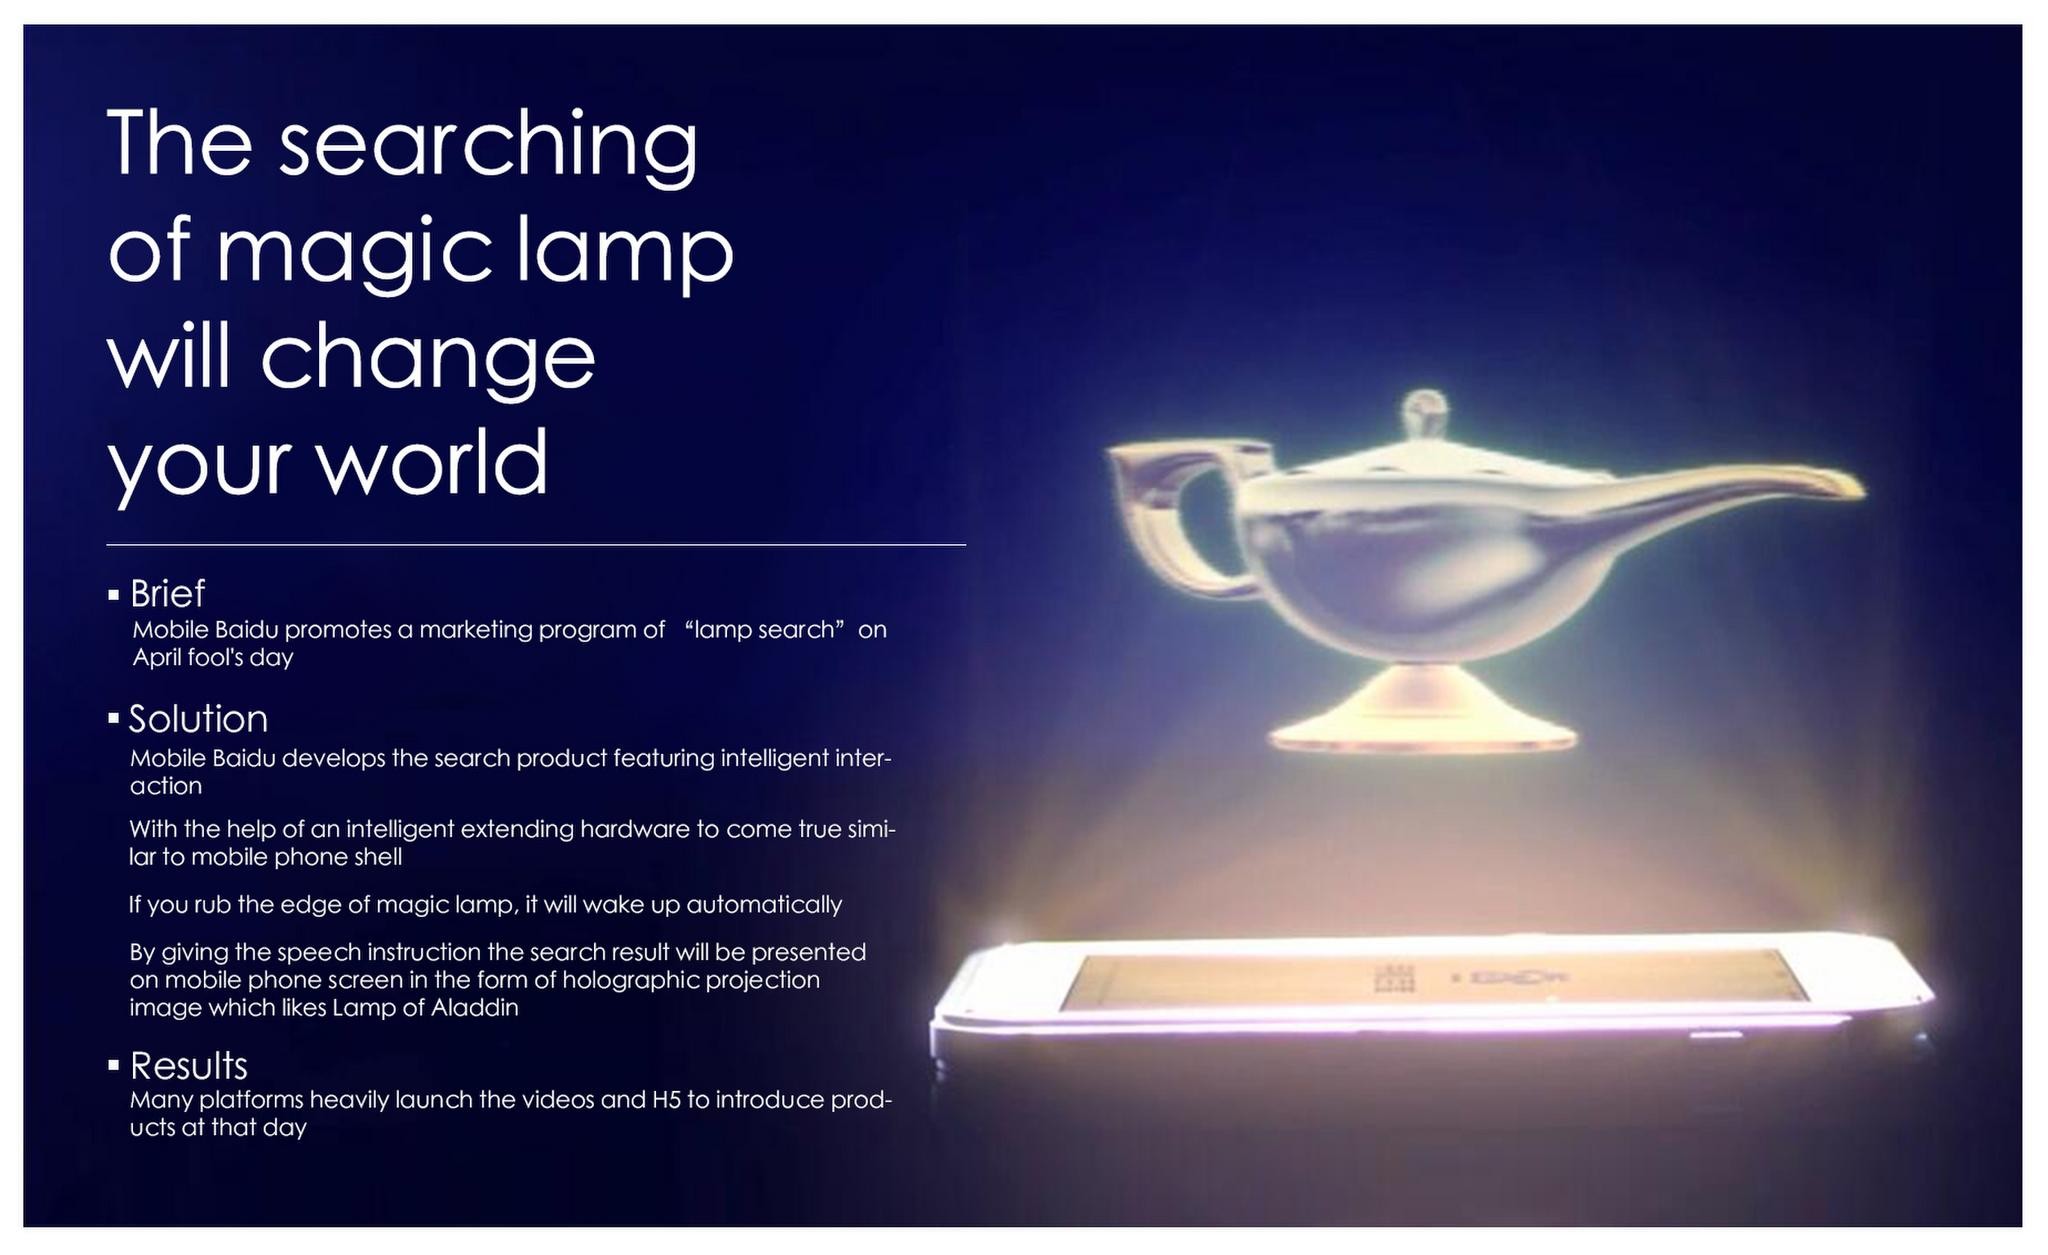 The searching of magic lamp